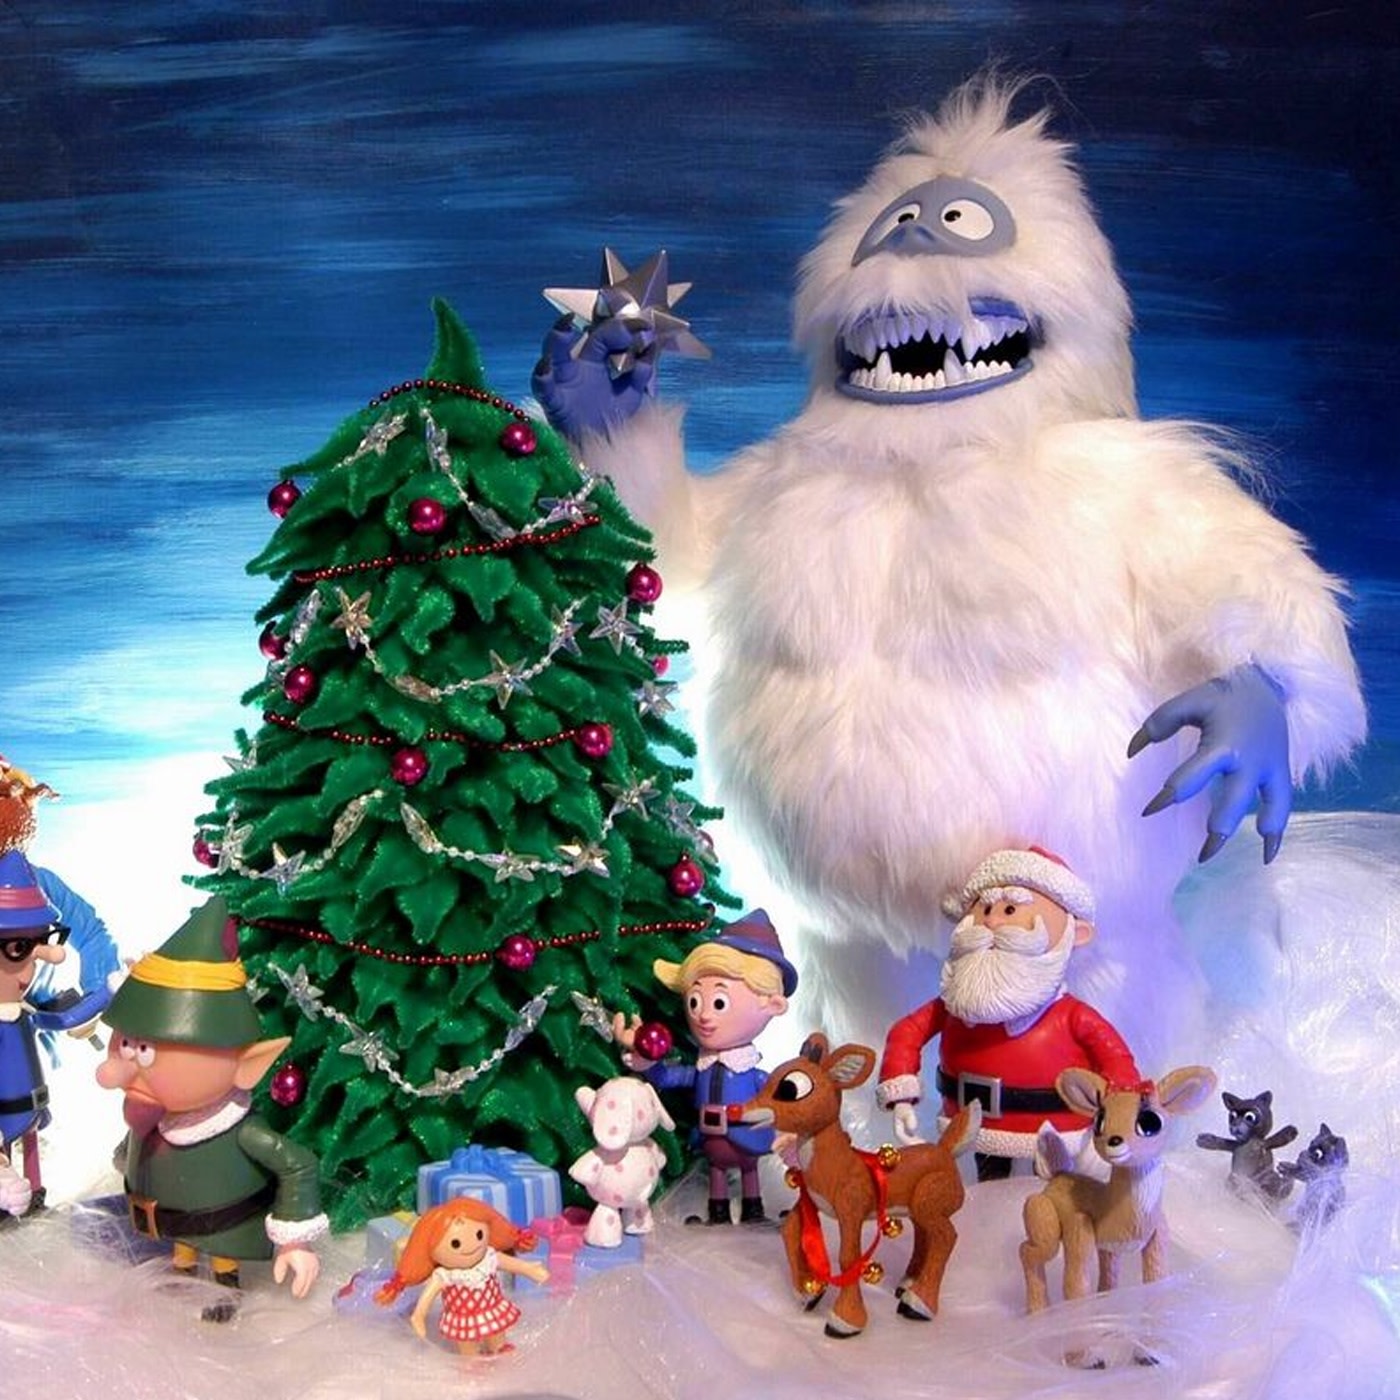 Behind the Scenes of the Longest Running, Highest Rated Holiday TV Special